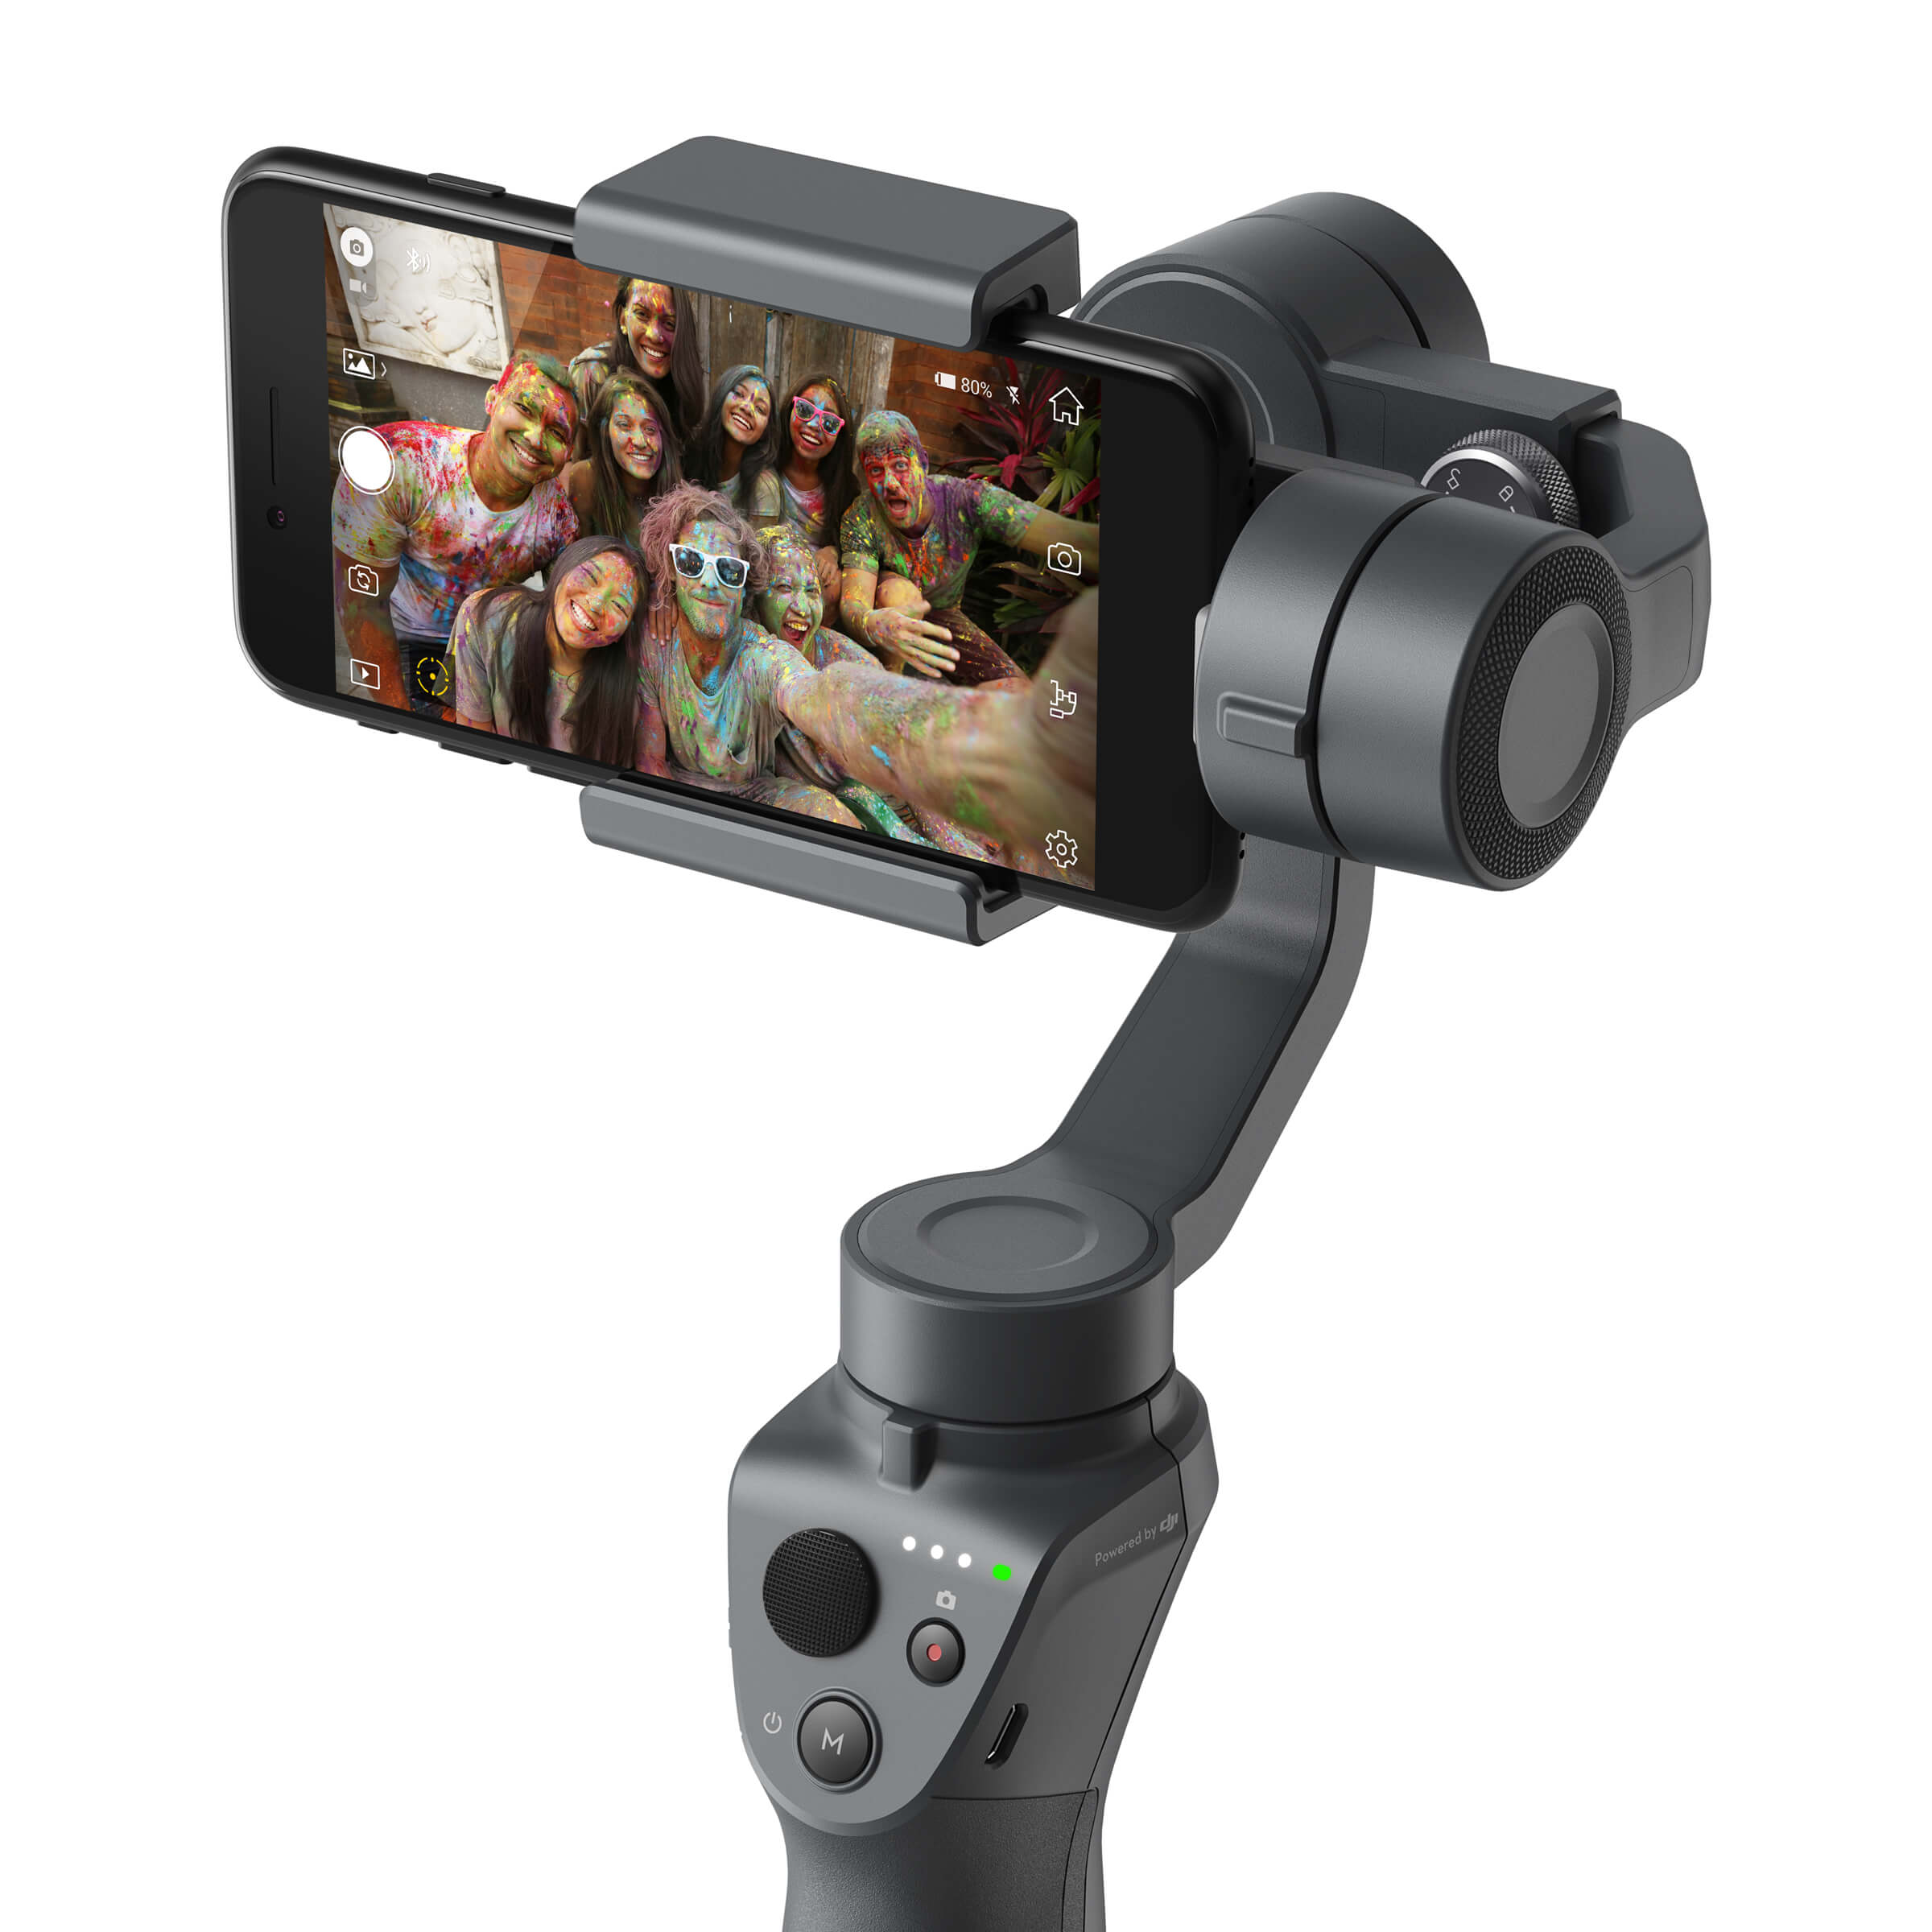 DJI Osmo Mobile 2 Now Available in PH: Priced at Only PhP7,900 â Gadget Pilipinas